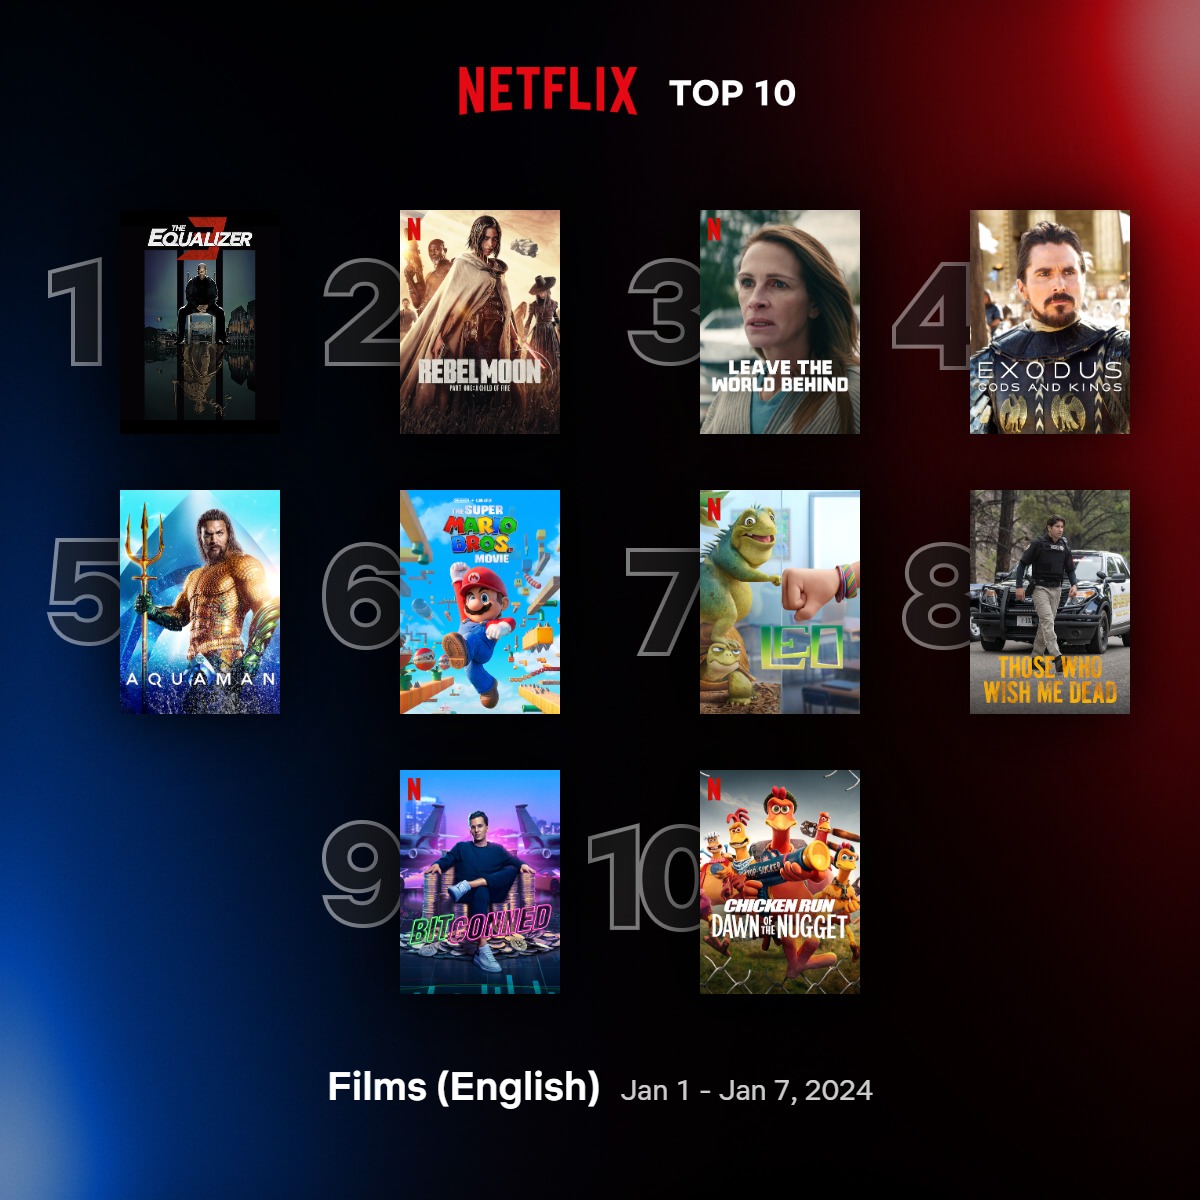 10 mostwatched Netflix movies from the past week